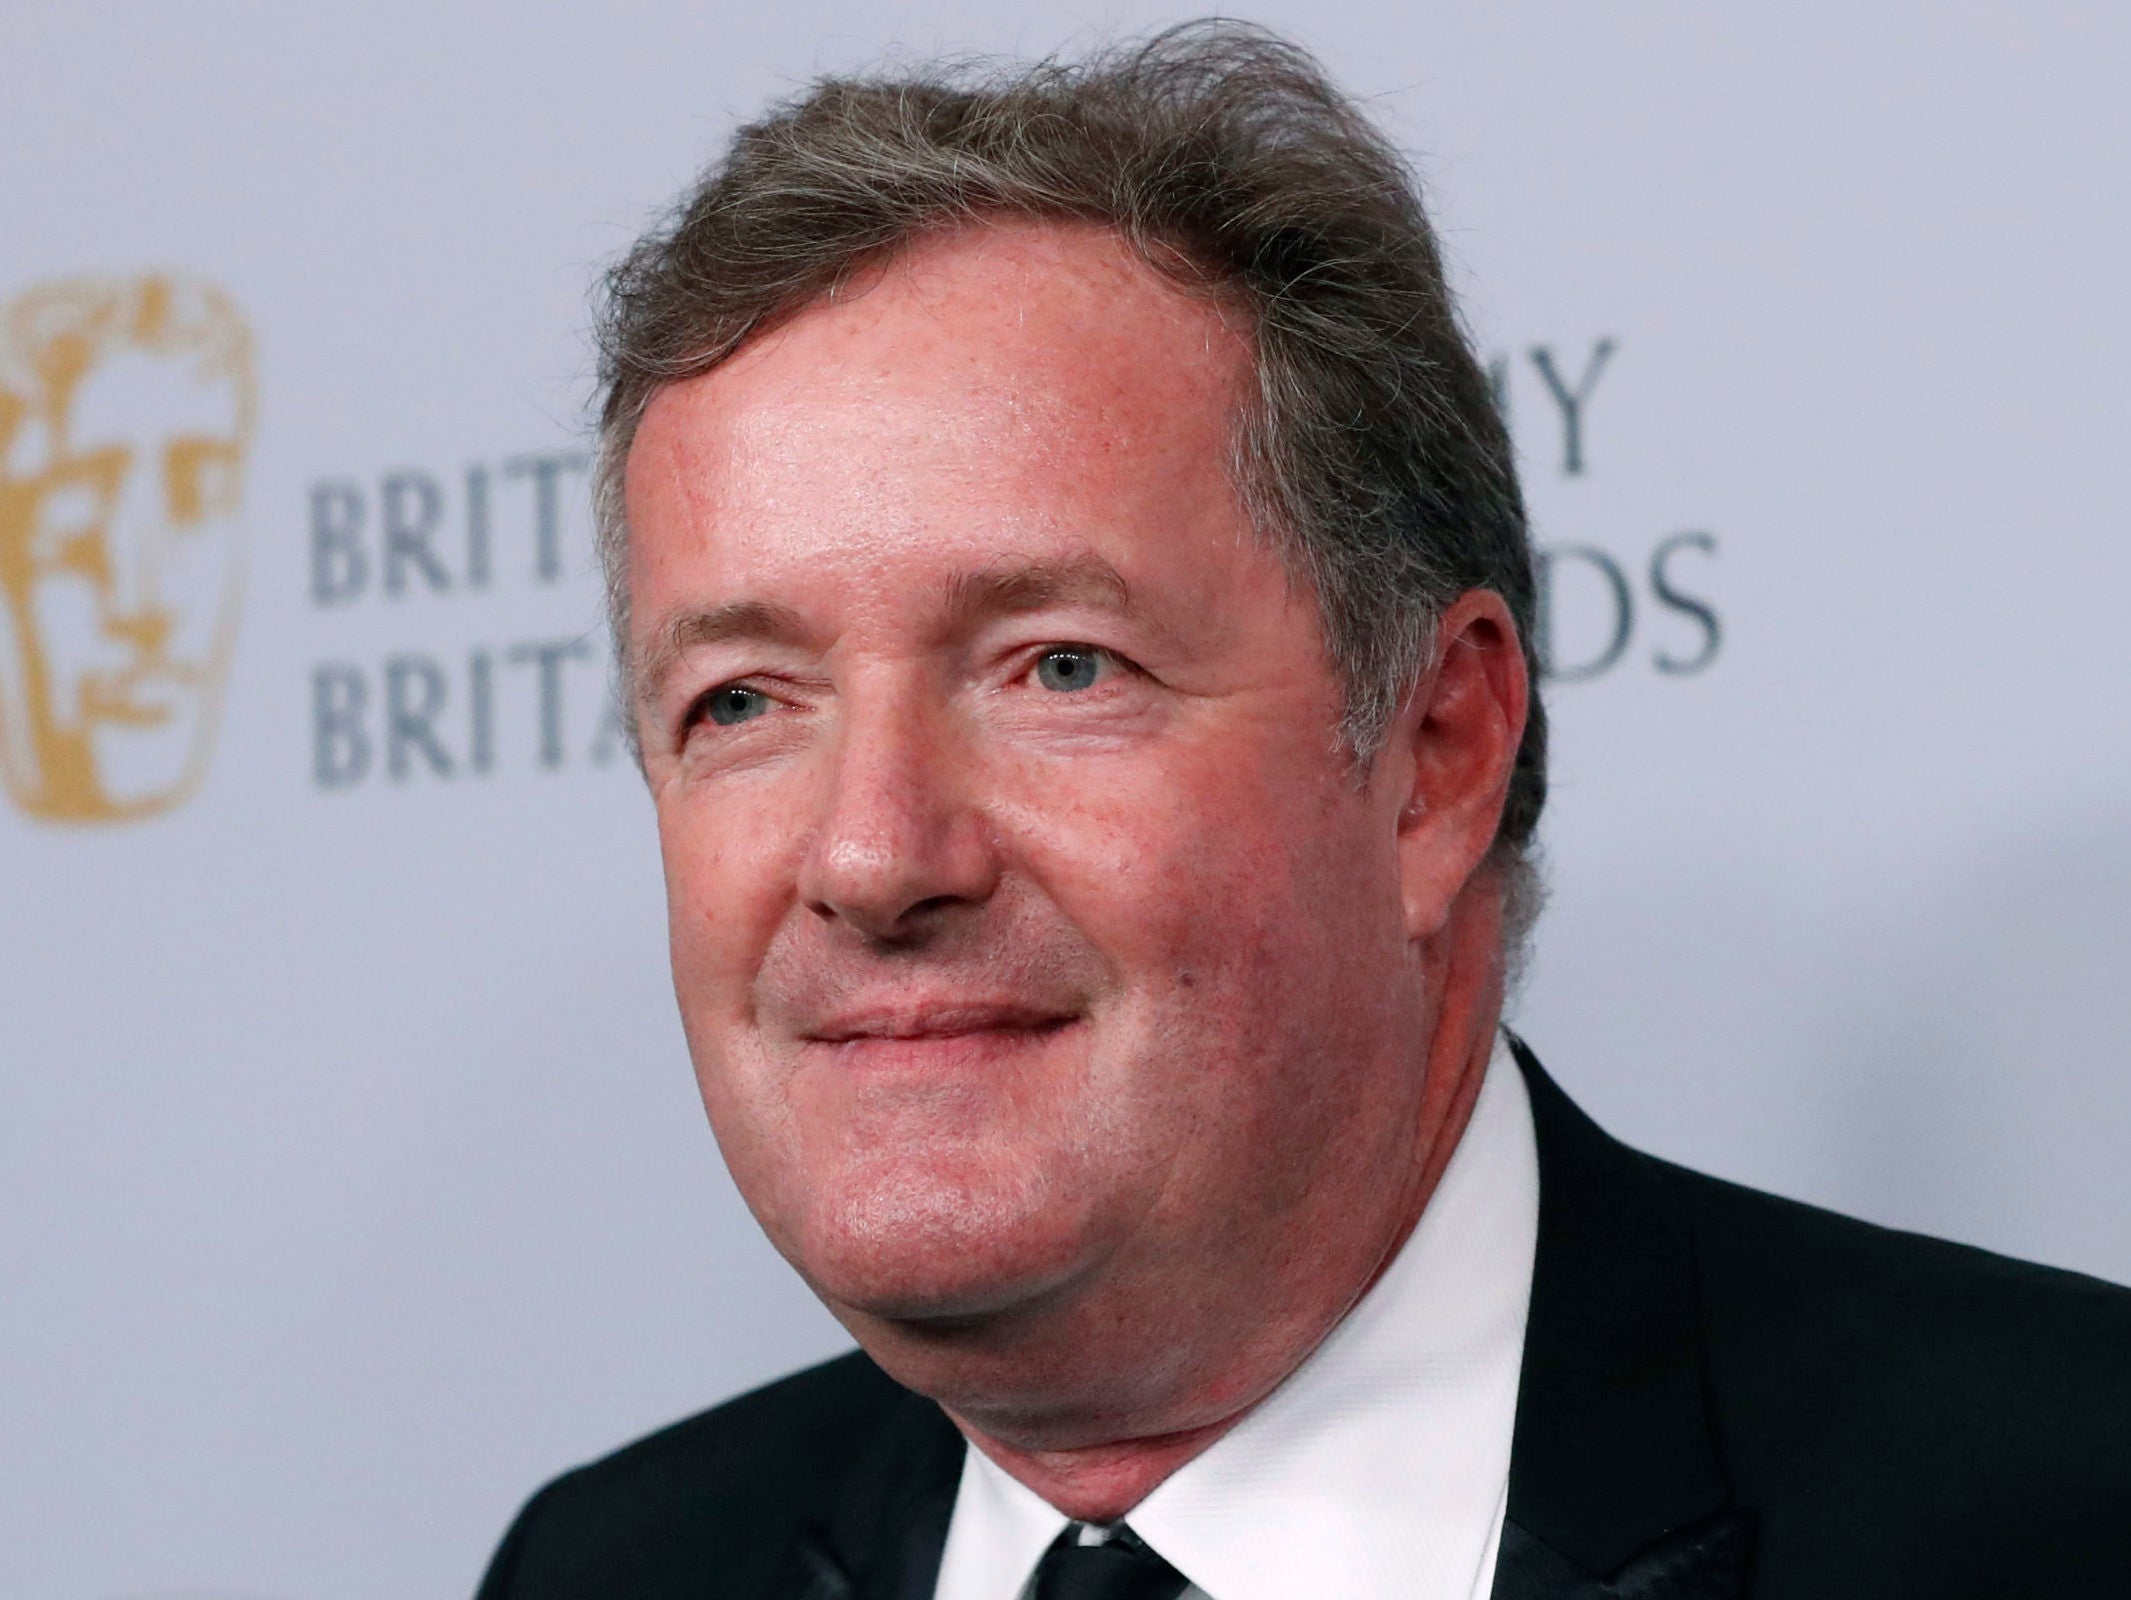 Piers Morgan says he and Andrew Neil saw Boris Johnson interview snub as 'badge of honour'